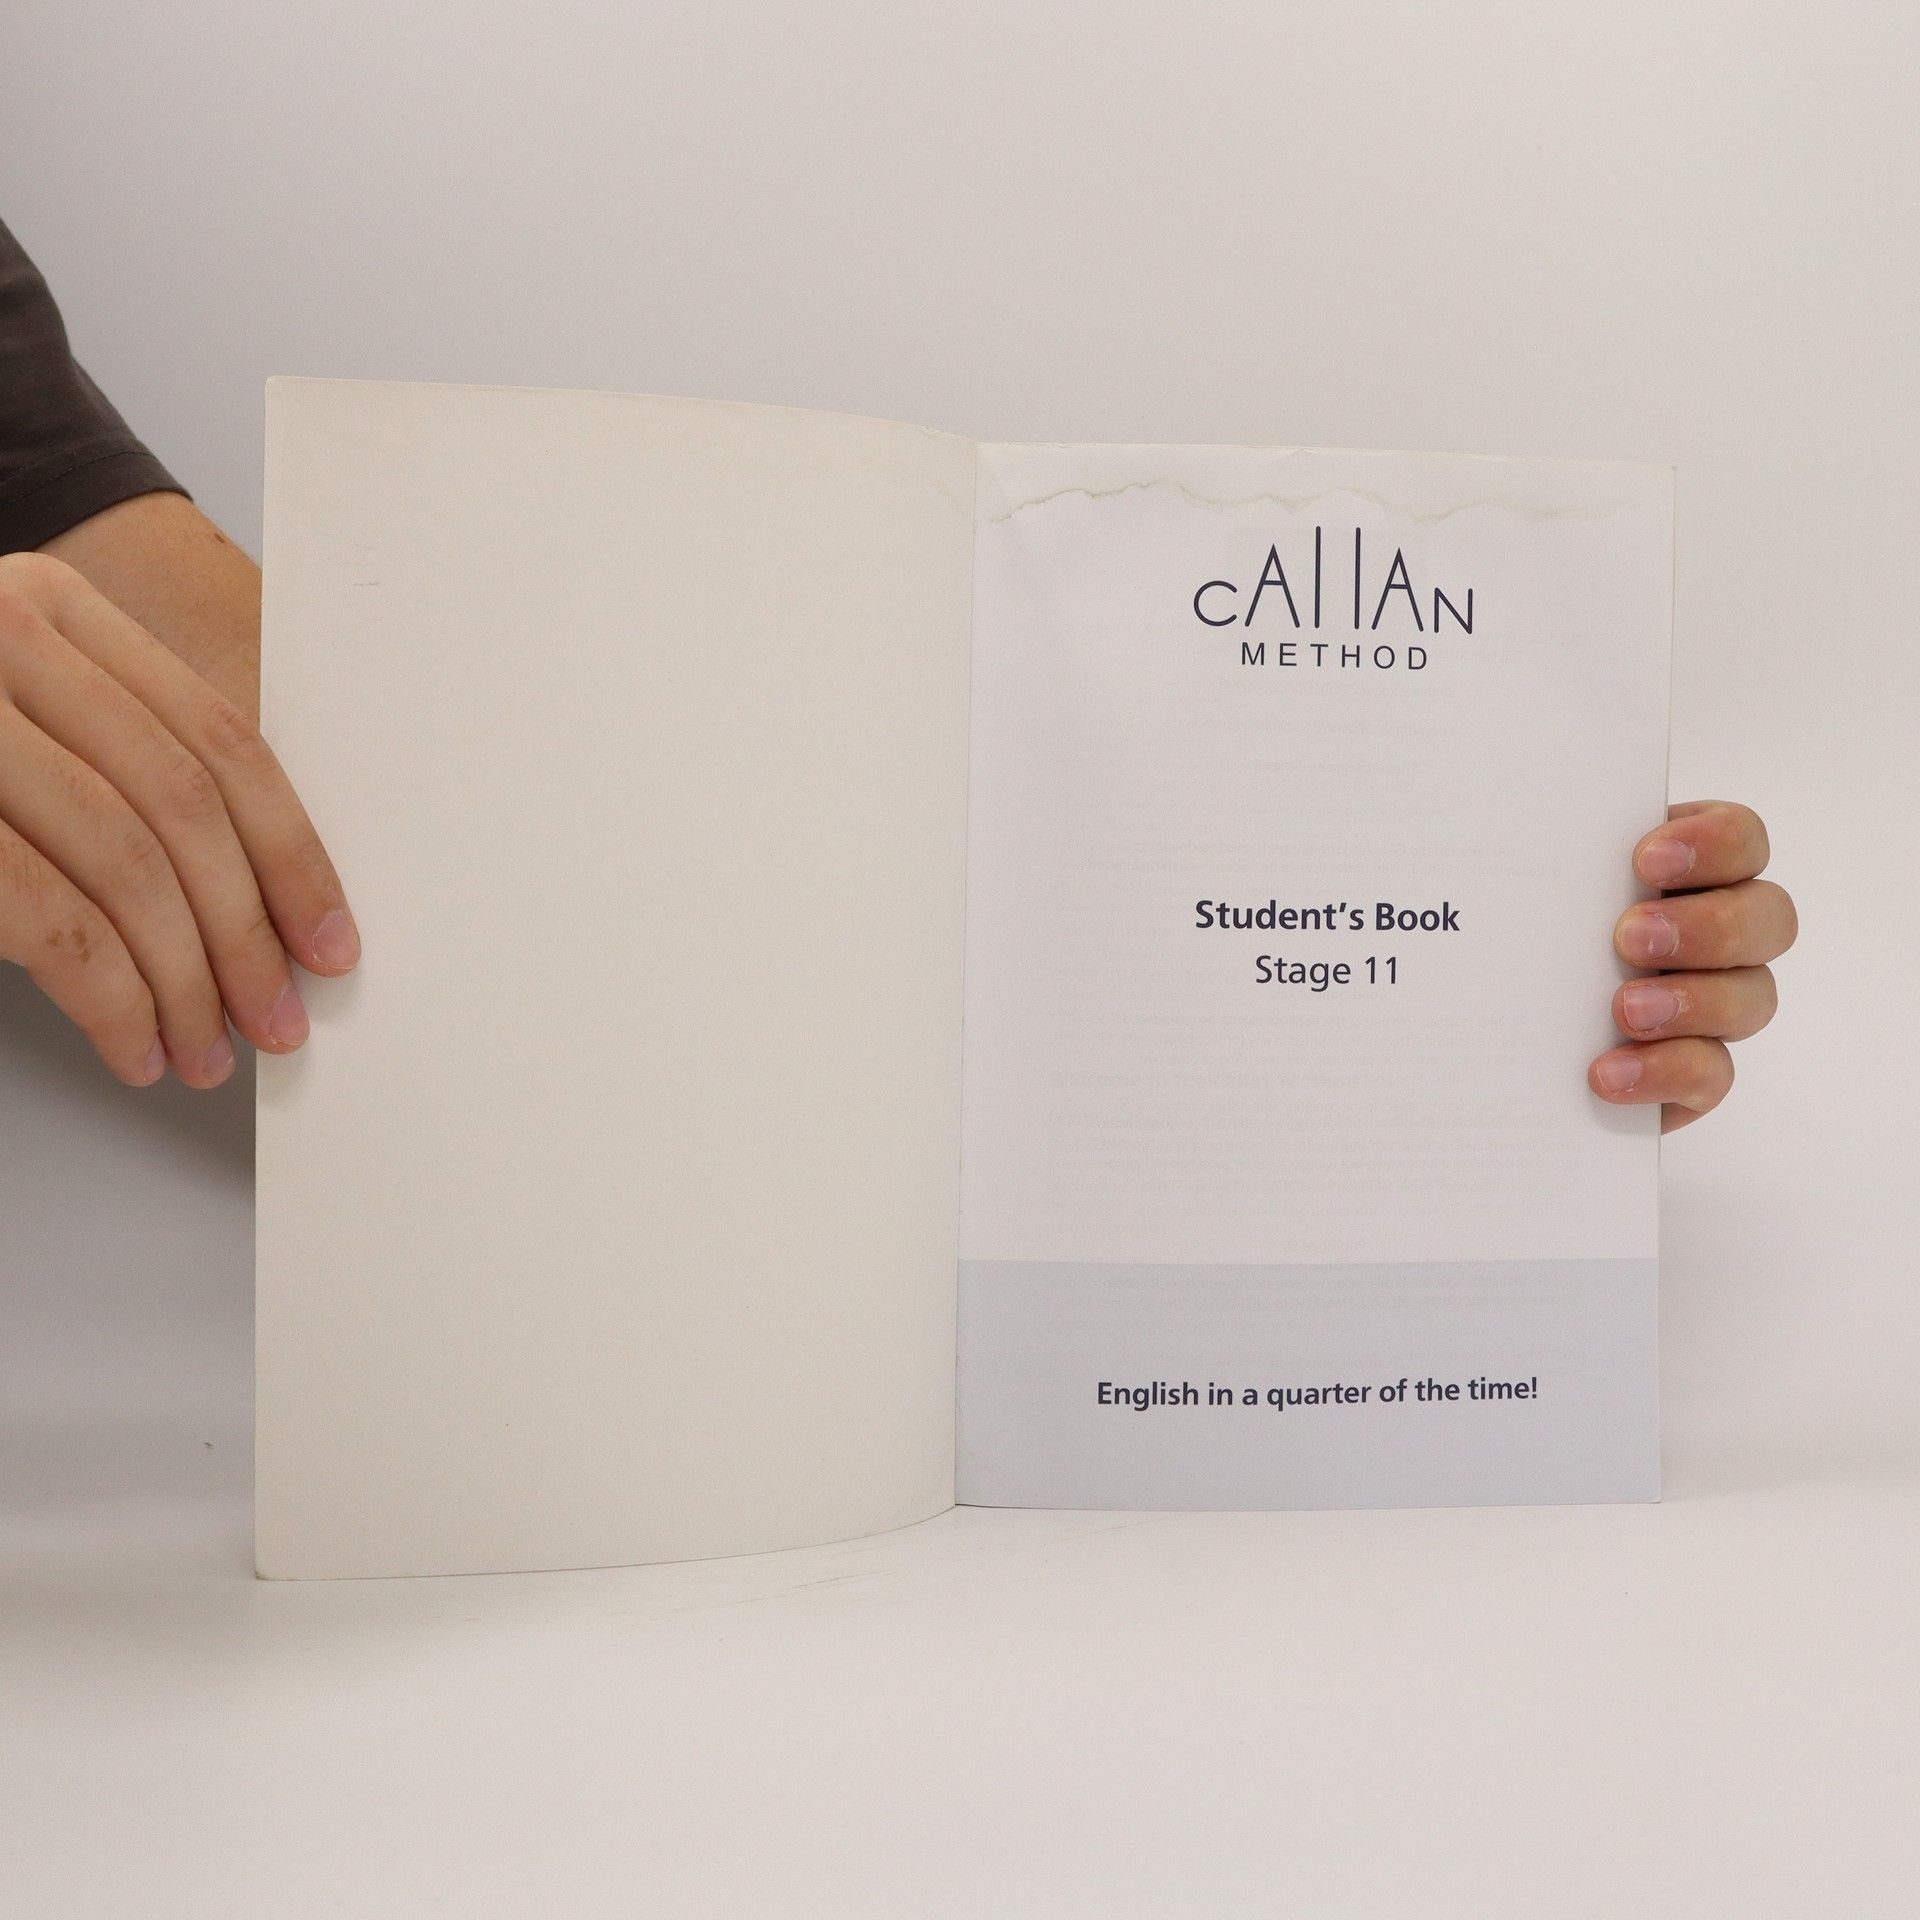 Callan Method.: Student's Book. Stage 11, Lessons 164-177 